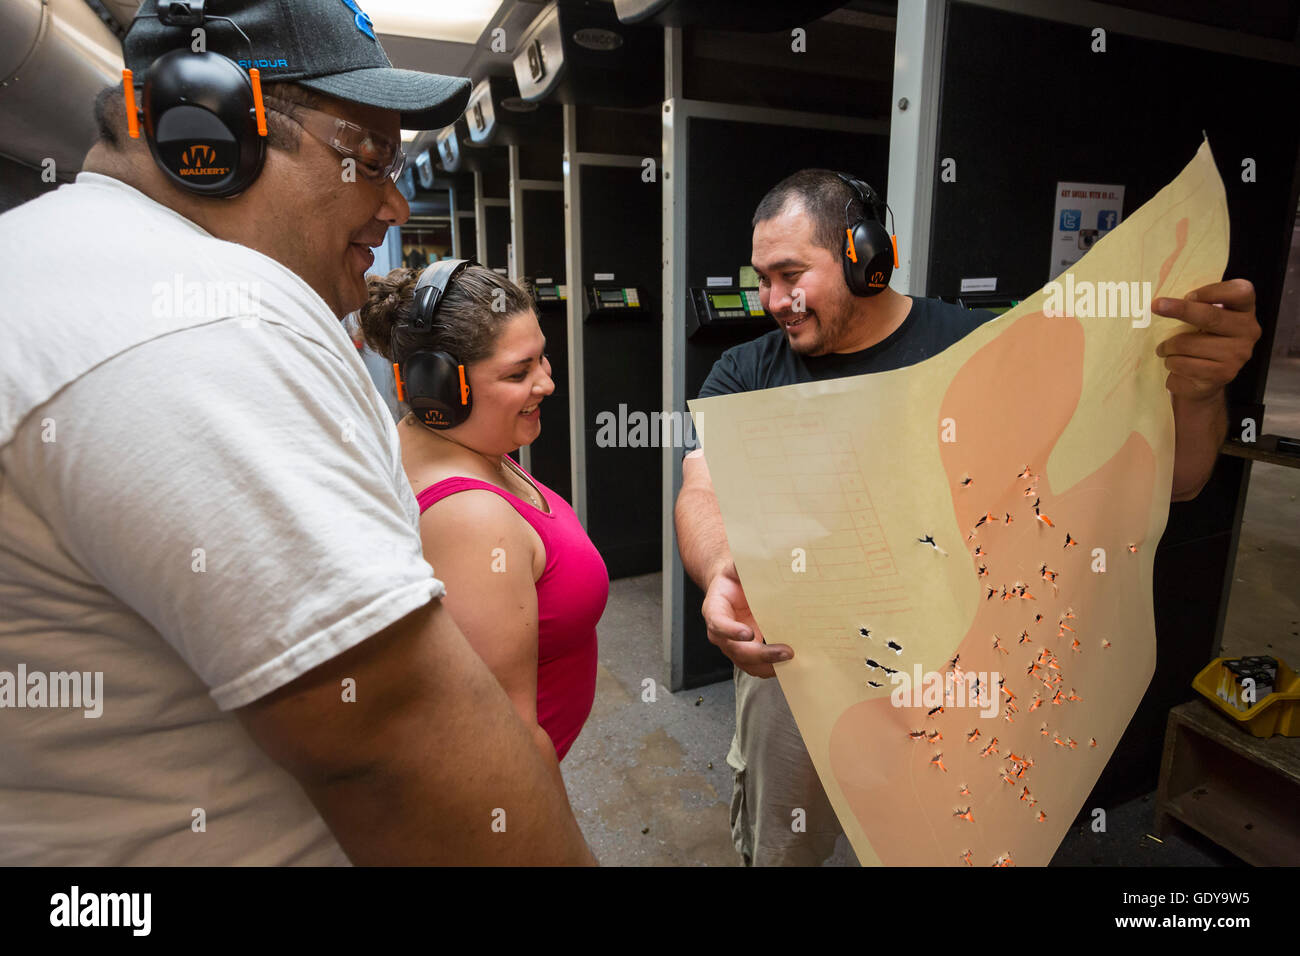 Las Vegas, Nevada - A woman examines her target after practicing with her handgun at the Discount Firearms + Ammo. Stock Photo